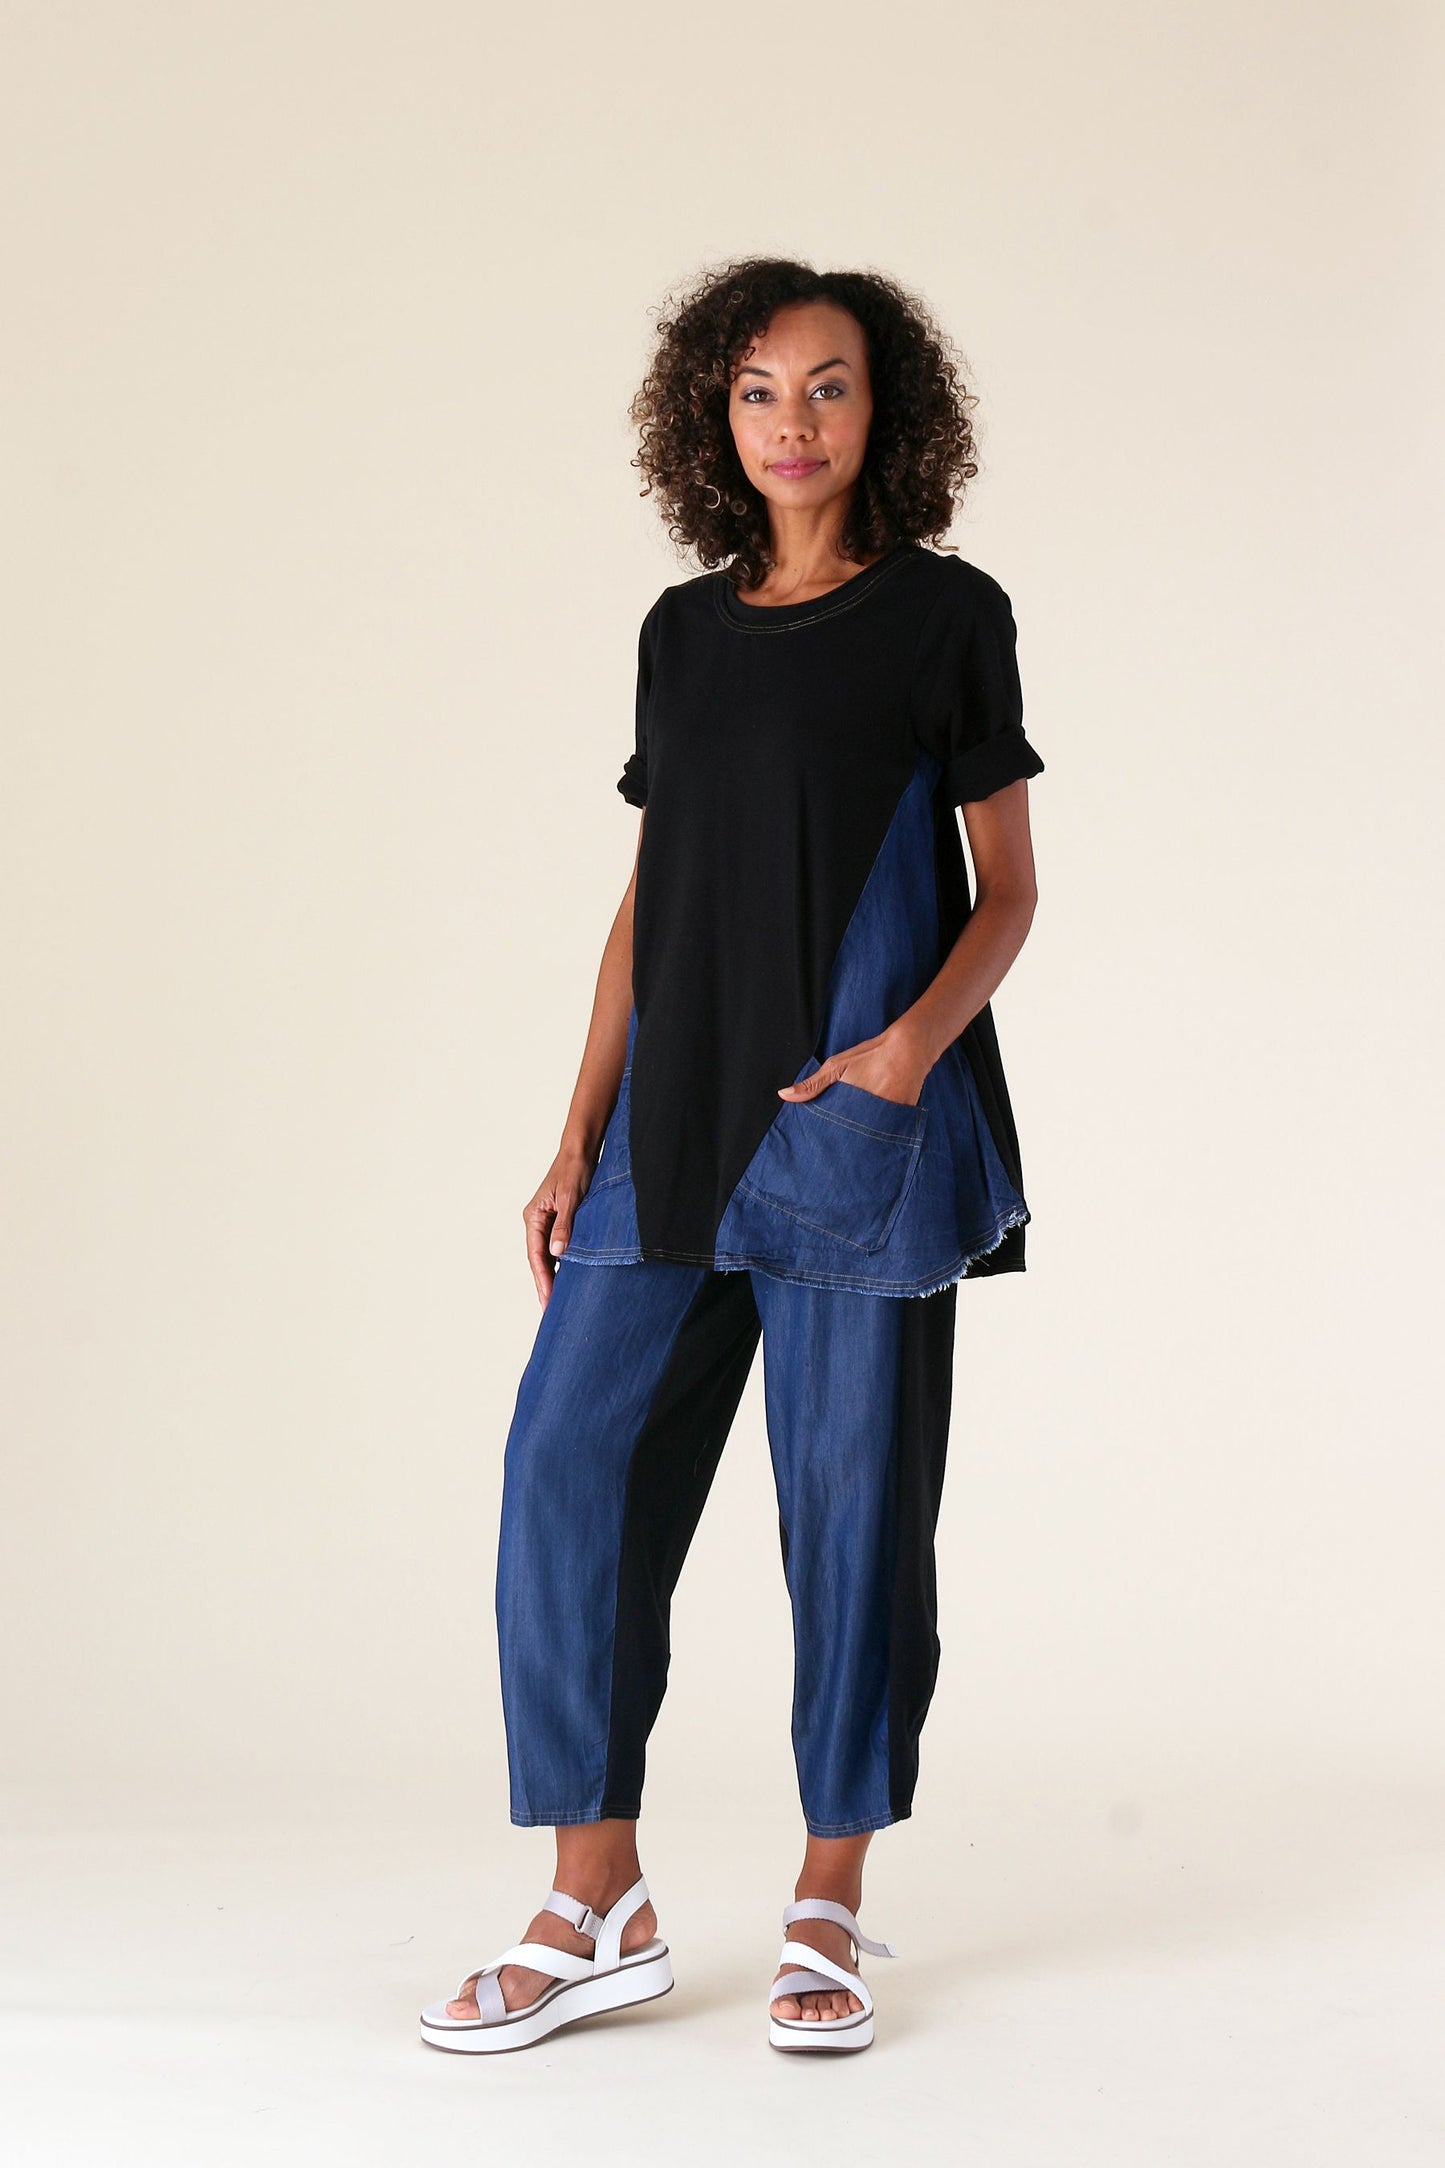 Load image into Gallery viewer, Black with Denim Accents Short Sleeve Top with Pockets
